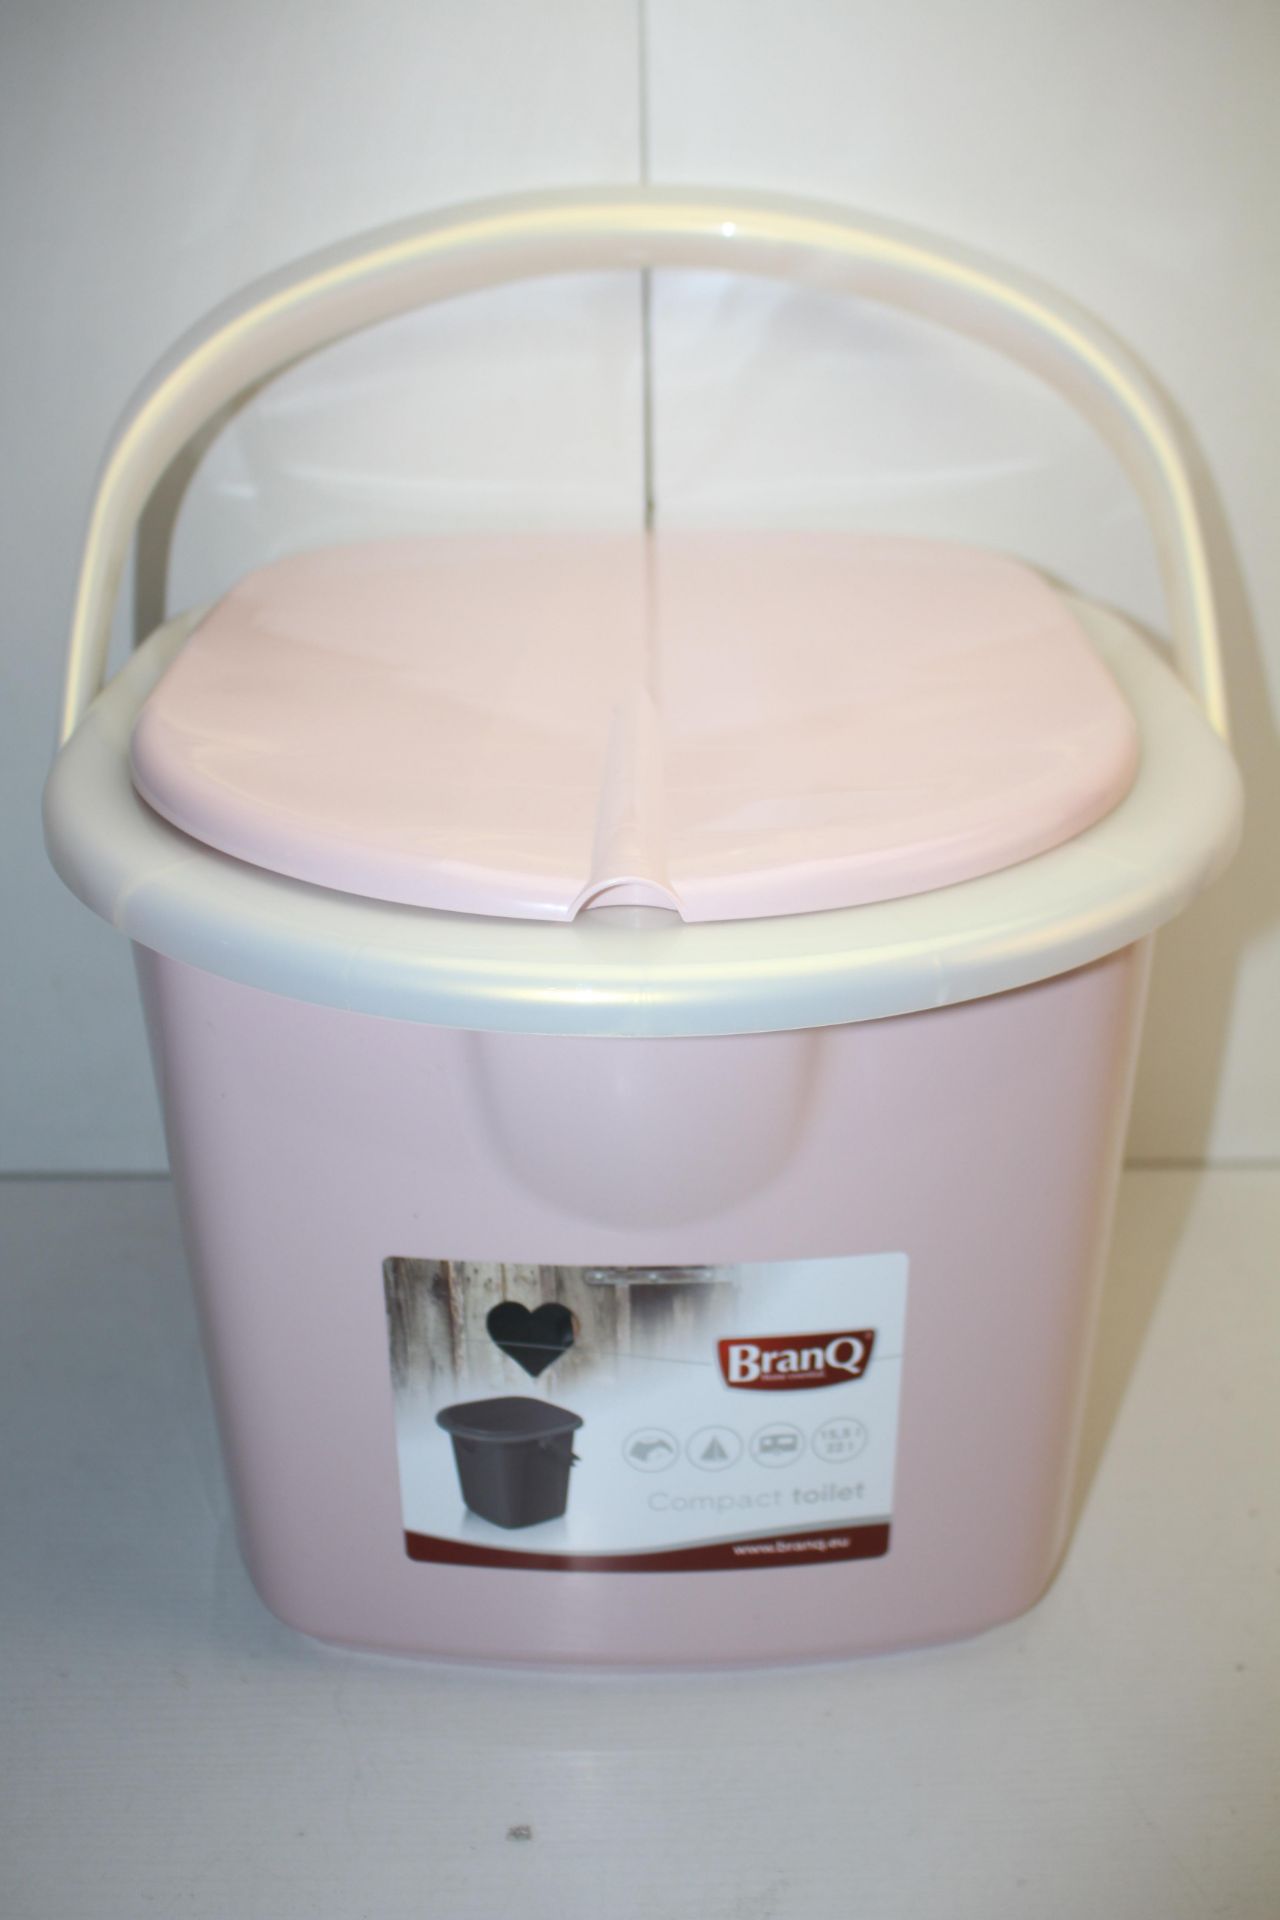 BOXED BRANQ COMPACT TOILET RRP £27.89Condition ReportAppraisal Available on Request- All Items are